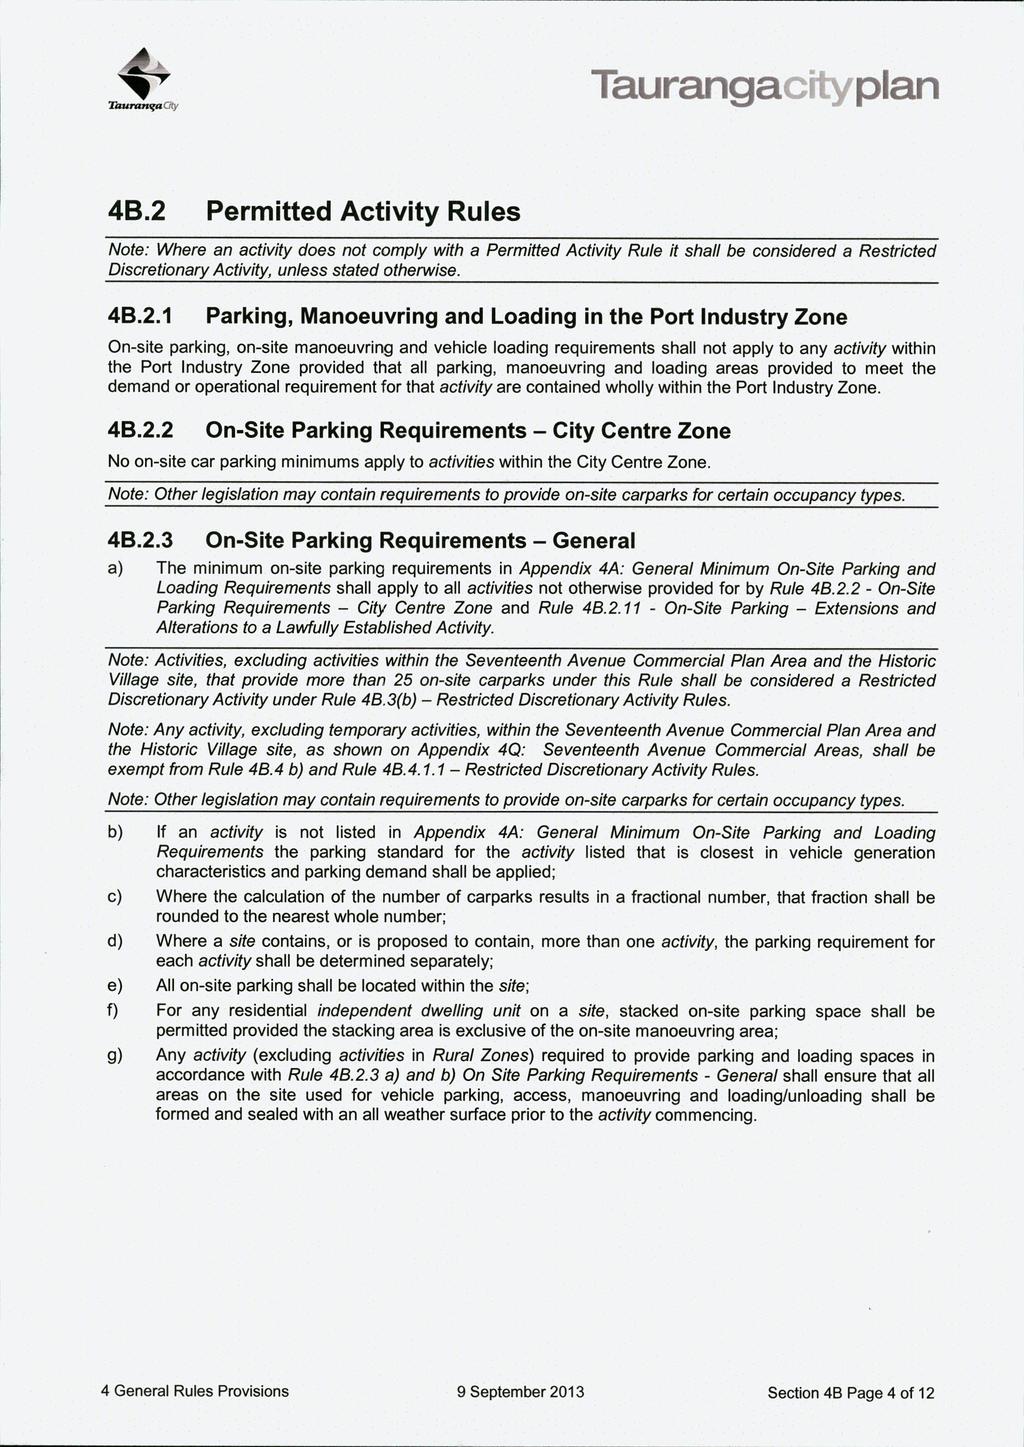 Tauranifa City 4B.2 Permitted Activity Rules Note: Where an activity does not comply with a Permitted Activity Rule it shall be considered a Restricted Discretionary Activity, unless stated otherwise.